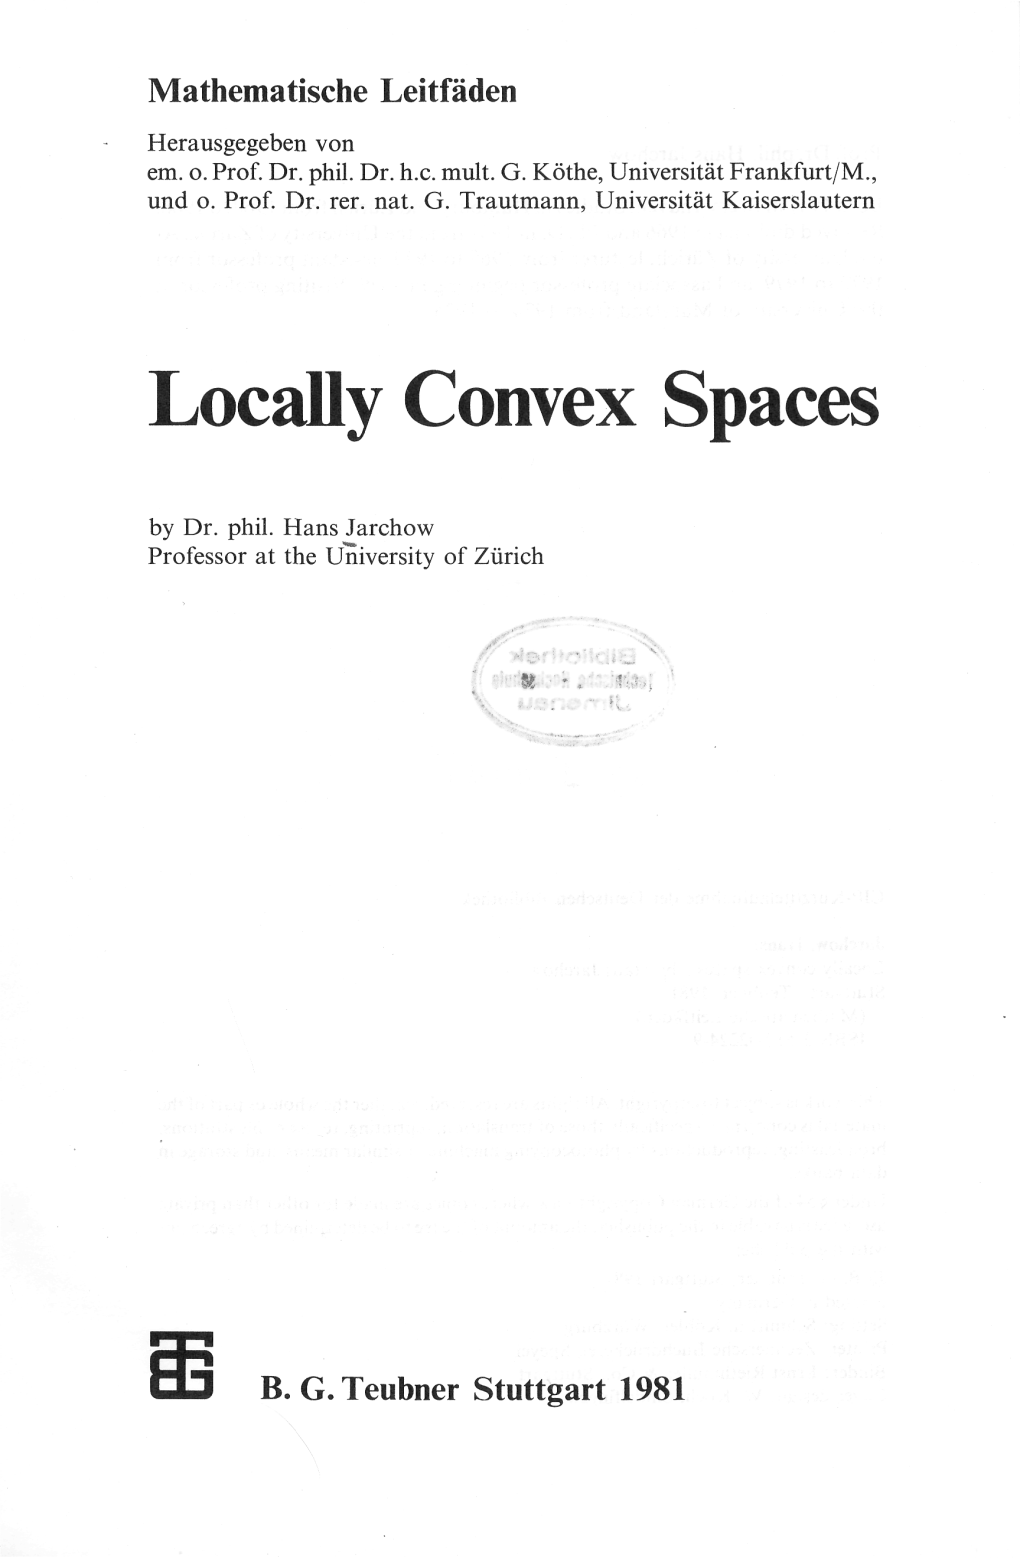 Locally Convex Spaces by Dr